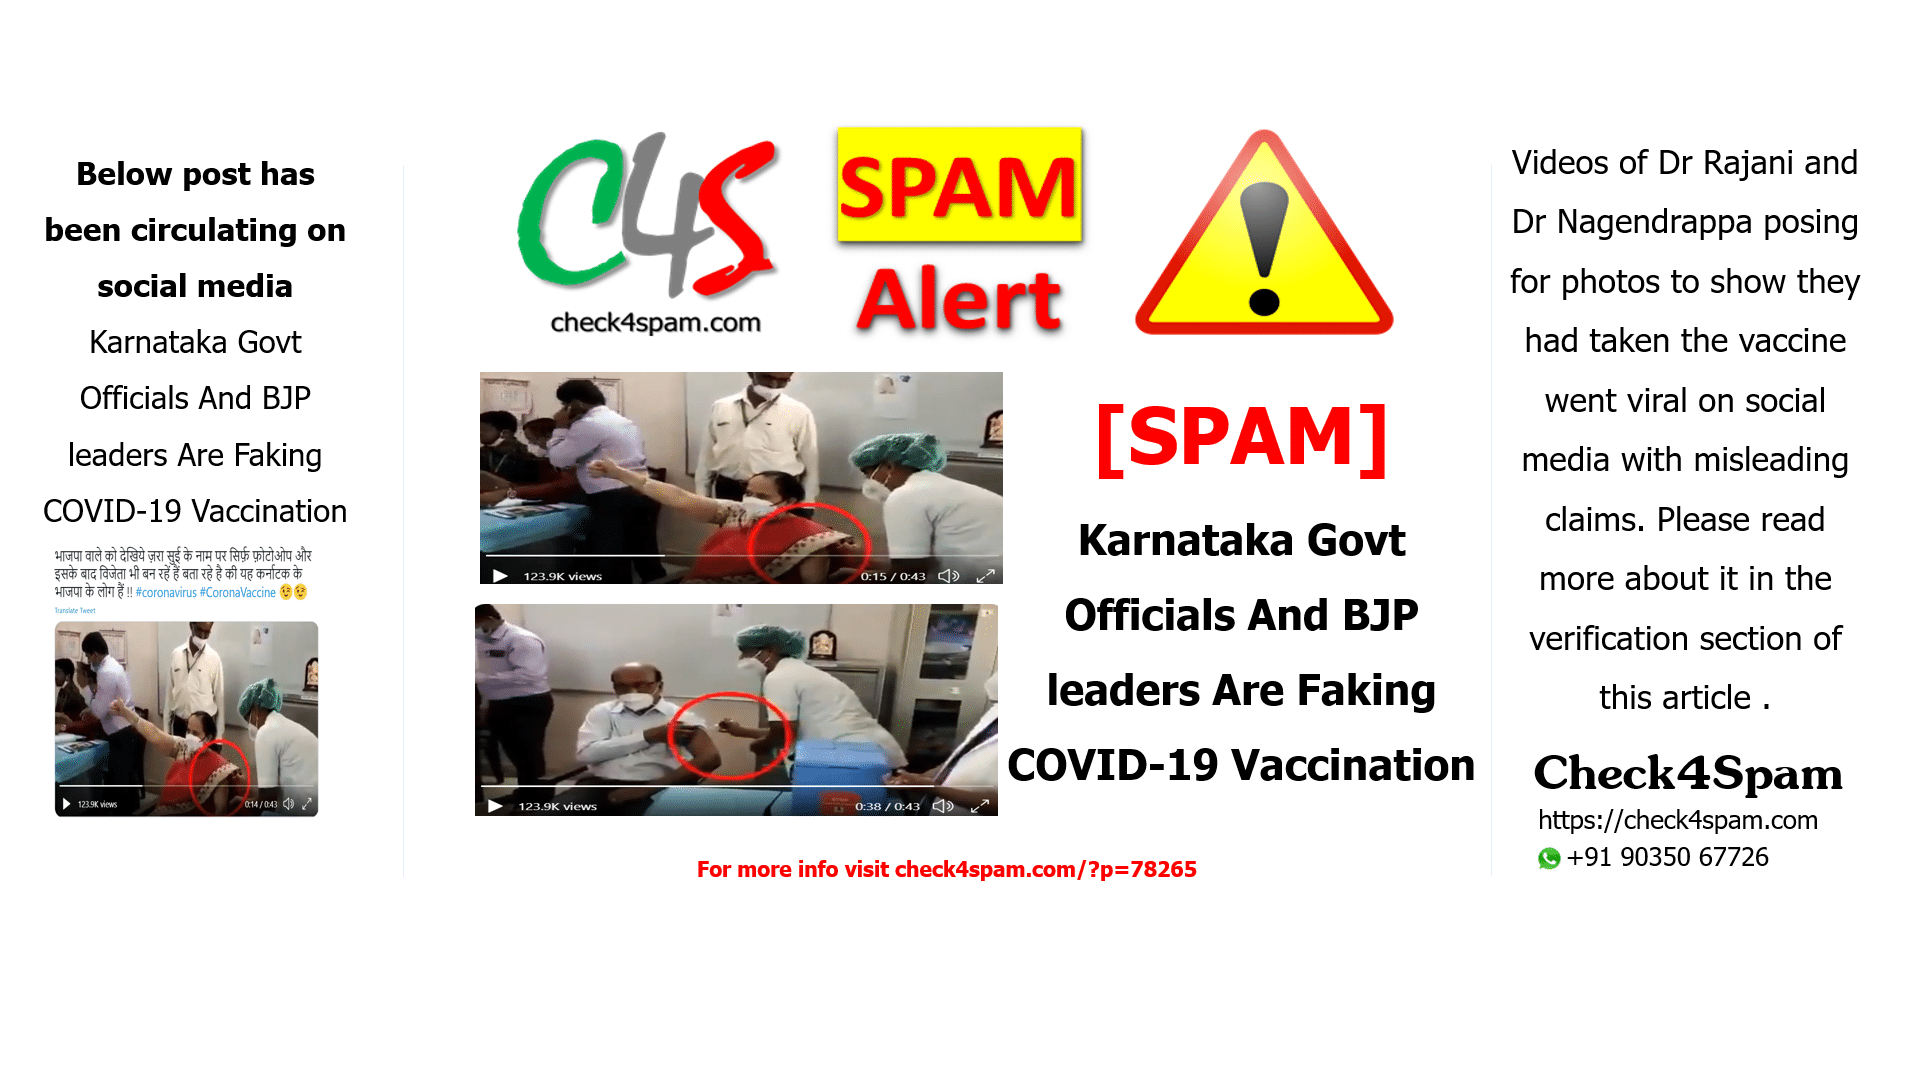 Karnataka Govt Officials Or BJP leaders Are Faking COVID-19 Vaccination